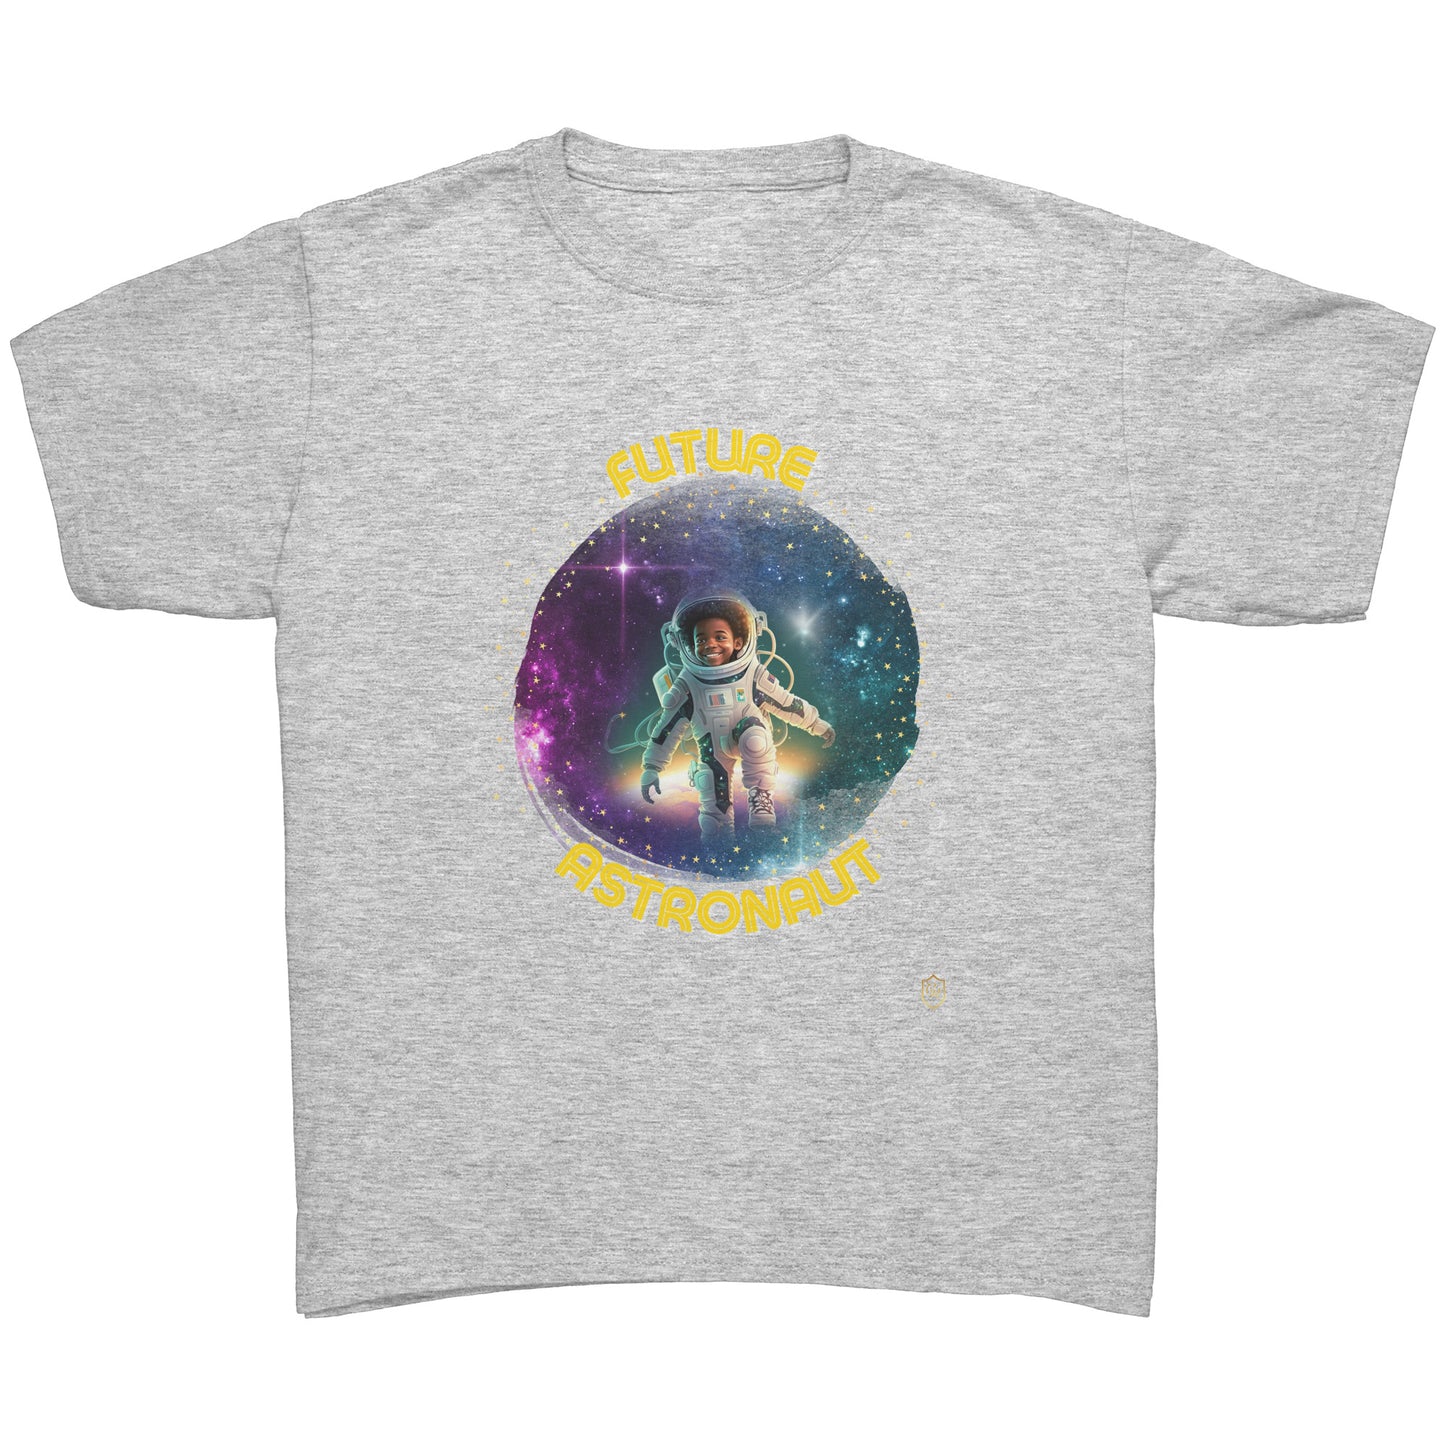 Young Boy's Galactic Explorer T-shirt: The Official Astronaut Gear of the Future